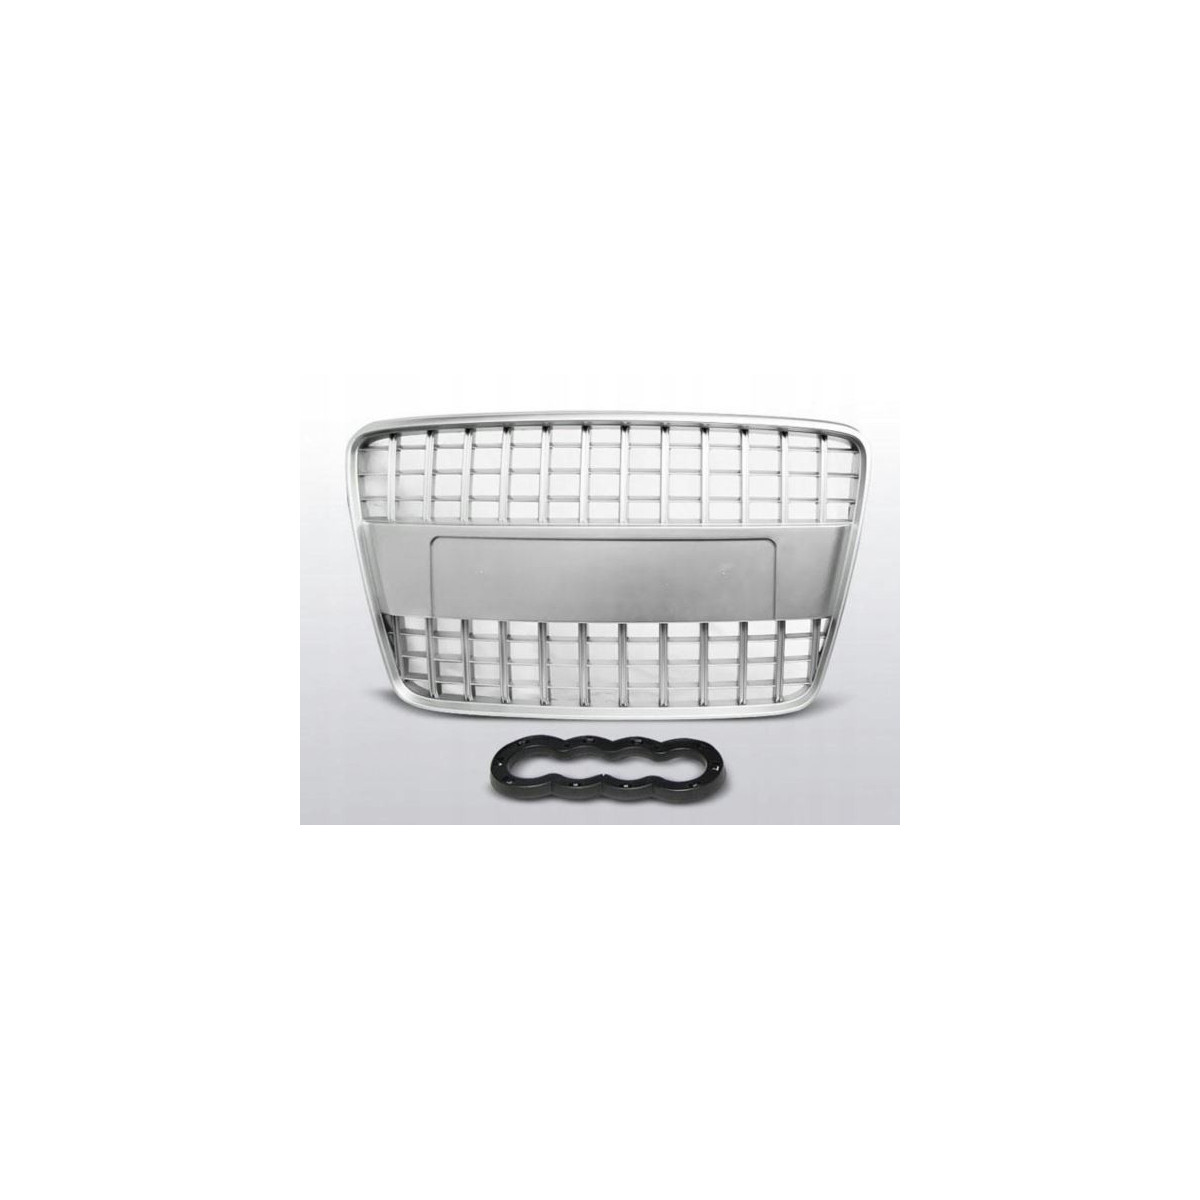 GRILL AUDI Q7 05-09 SILVER RS TYPE